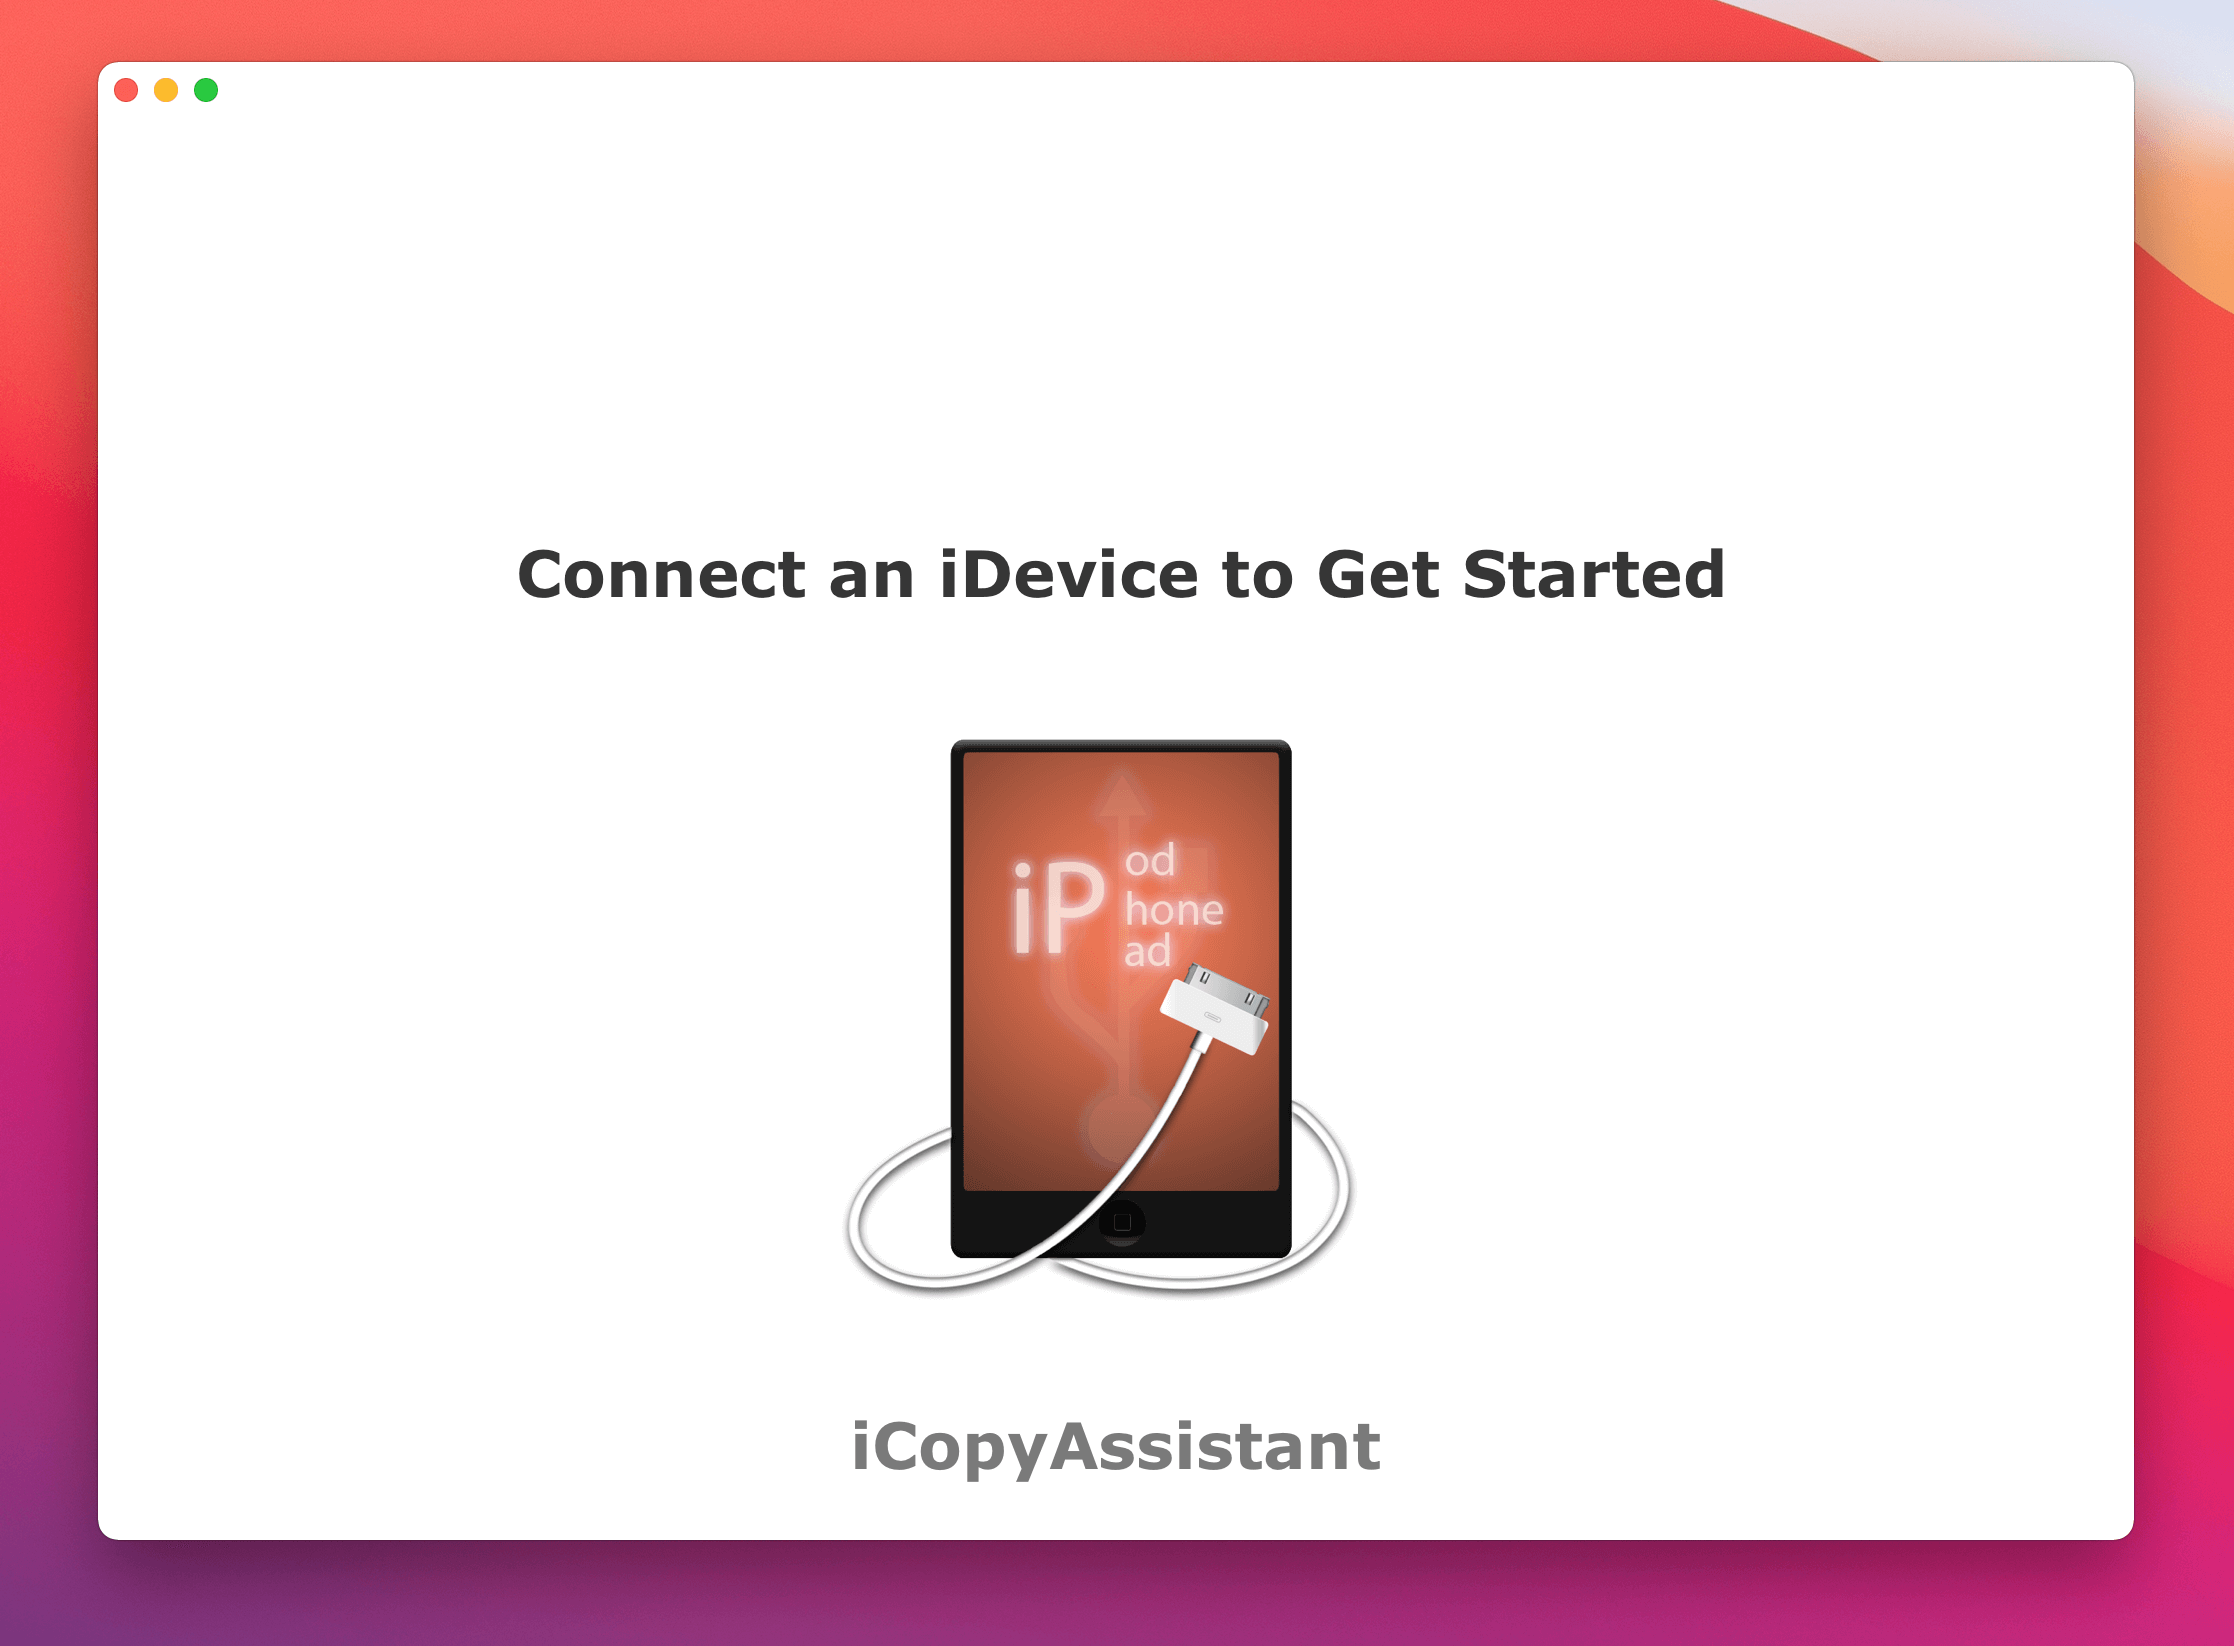 iCopyAssistant No device connected